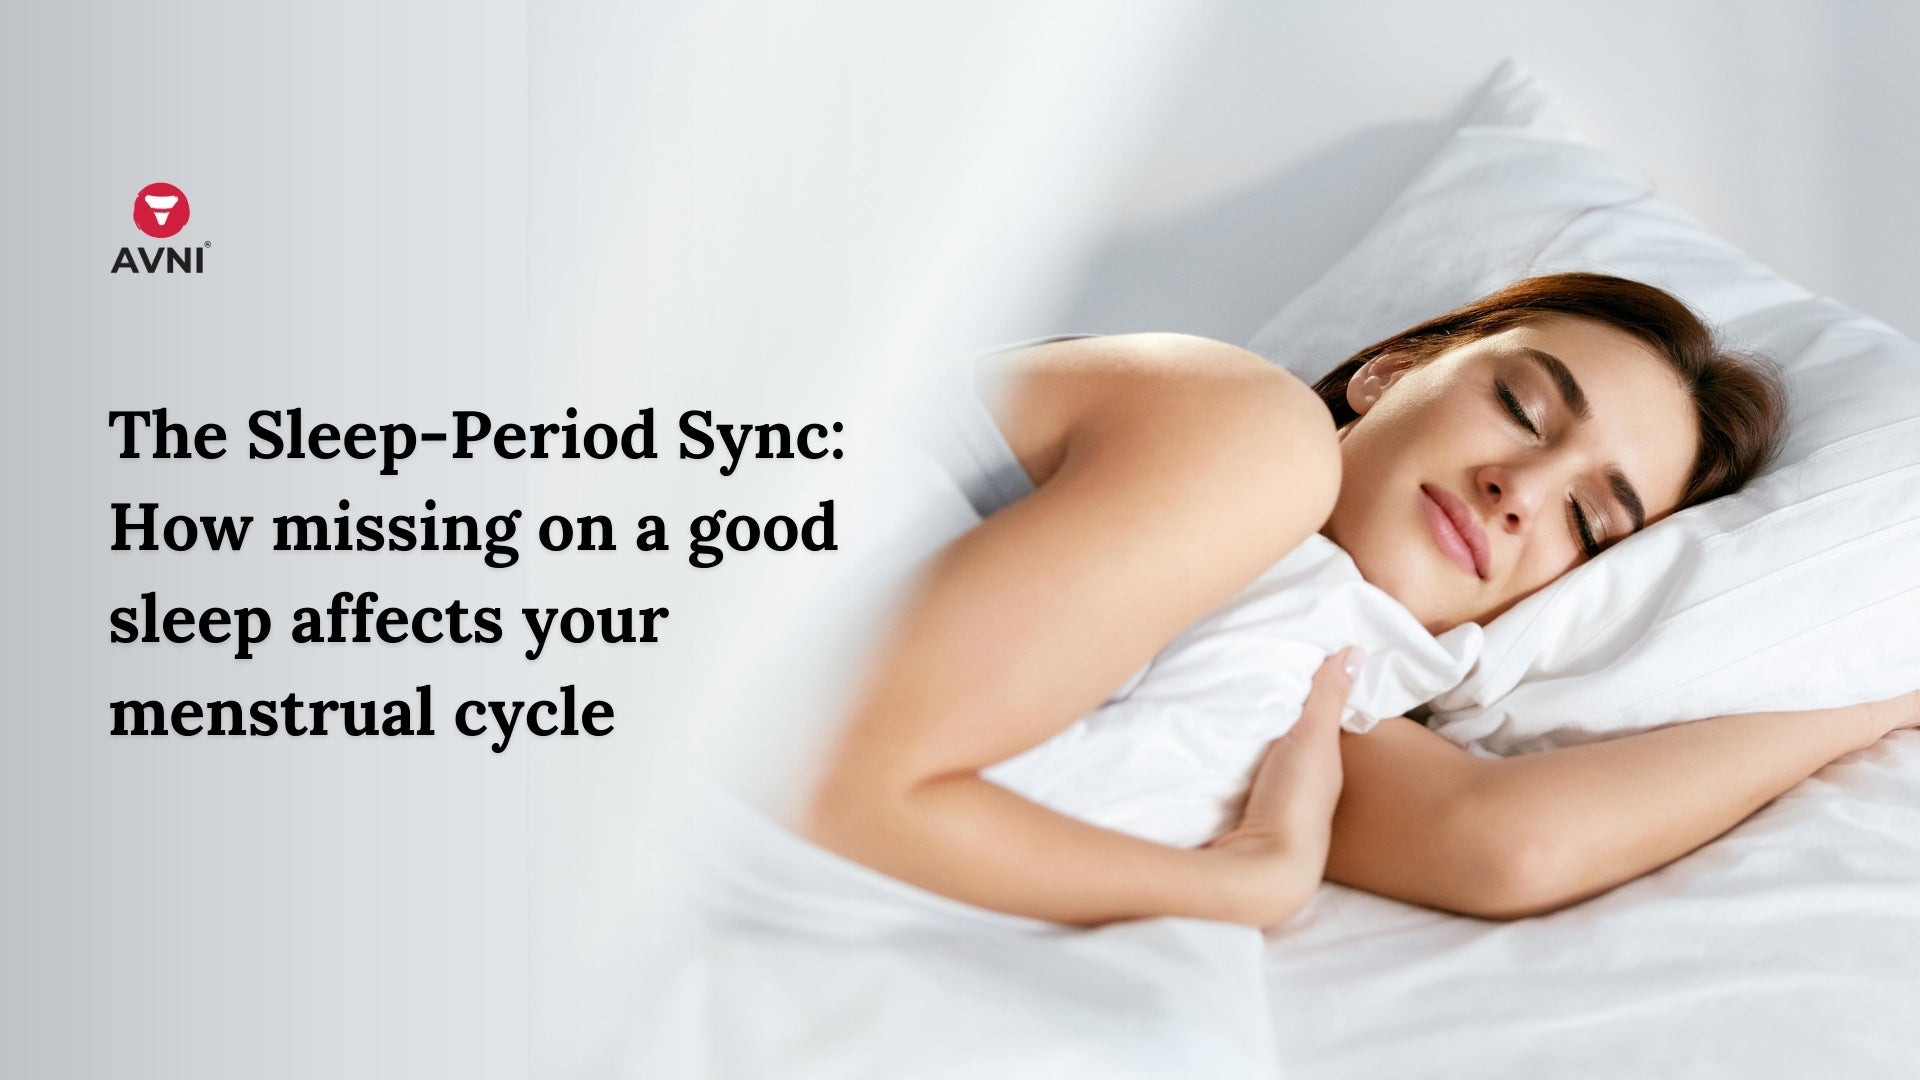 The Sleep-Period Sync: How missing on good a sleep affects your menstr